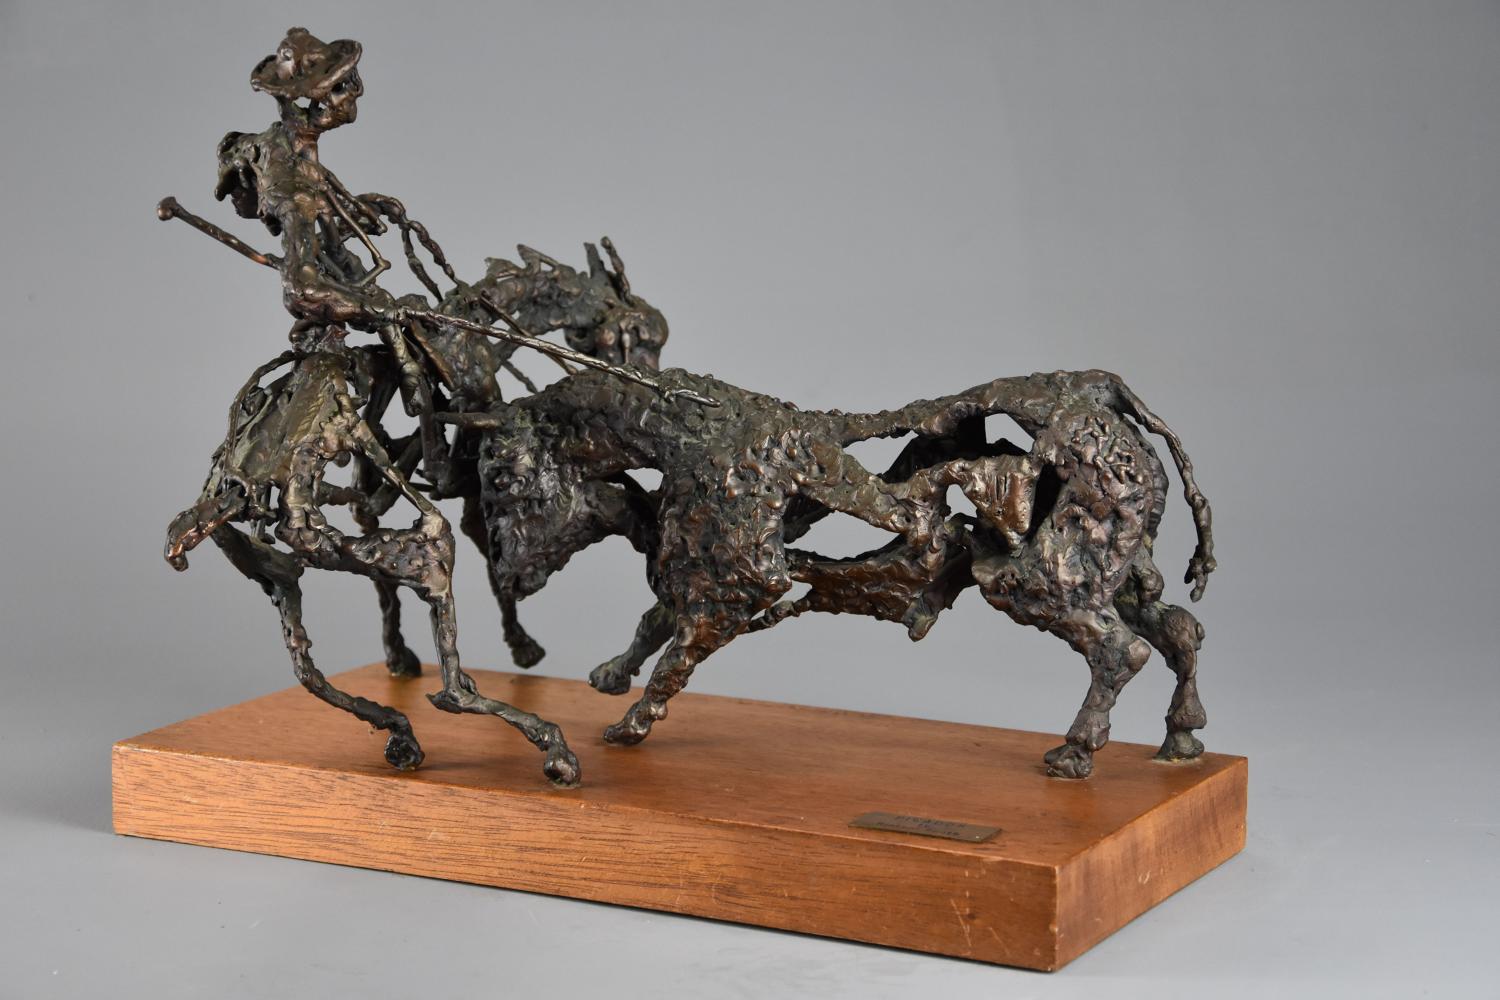 Bronze sculpture 'The Picador' by Daniel Rintoul Booth (1932-1978)